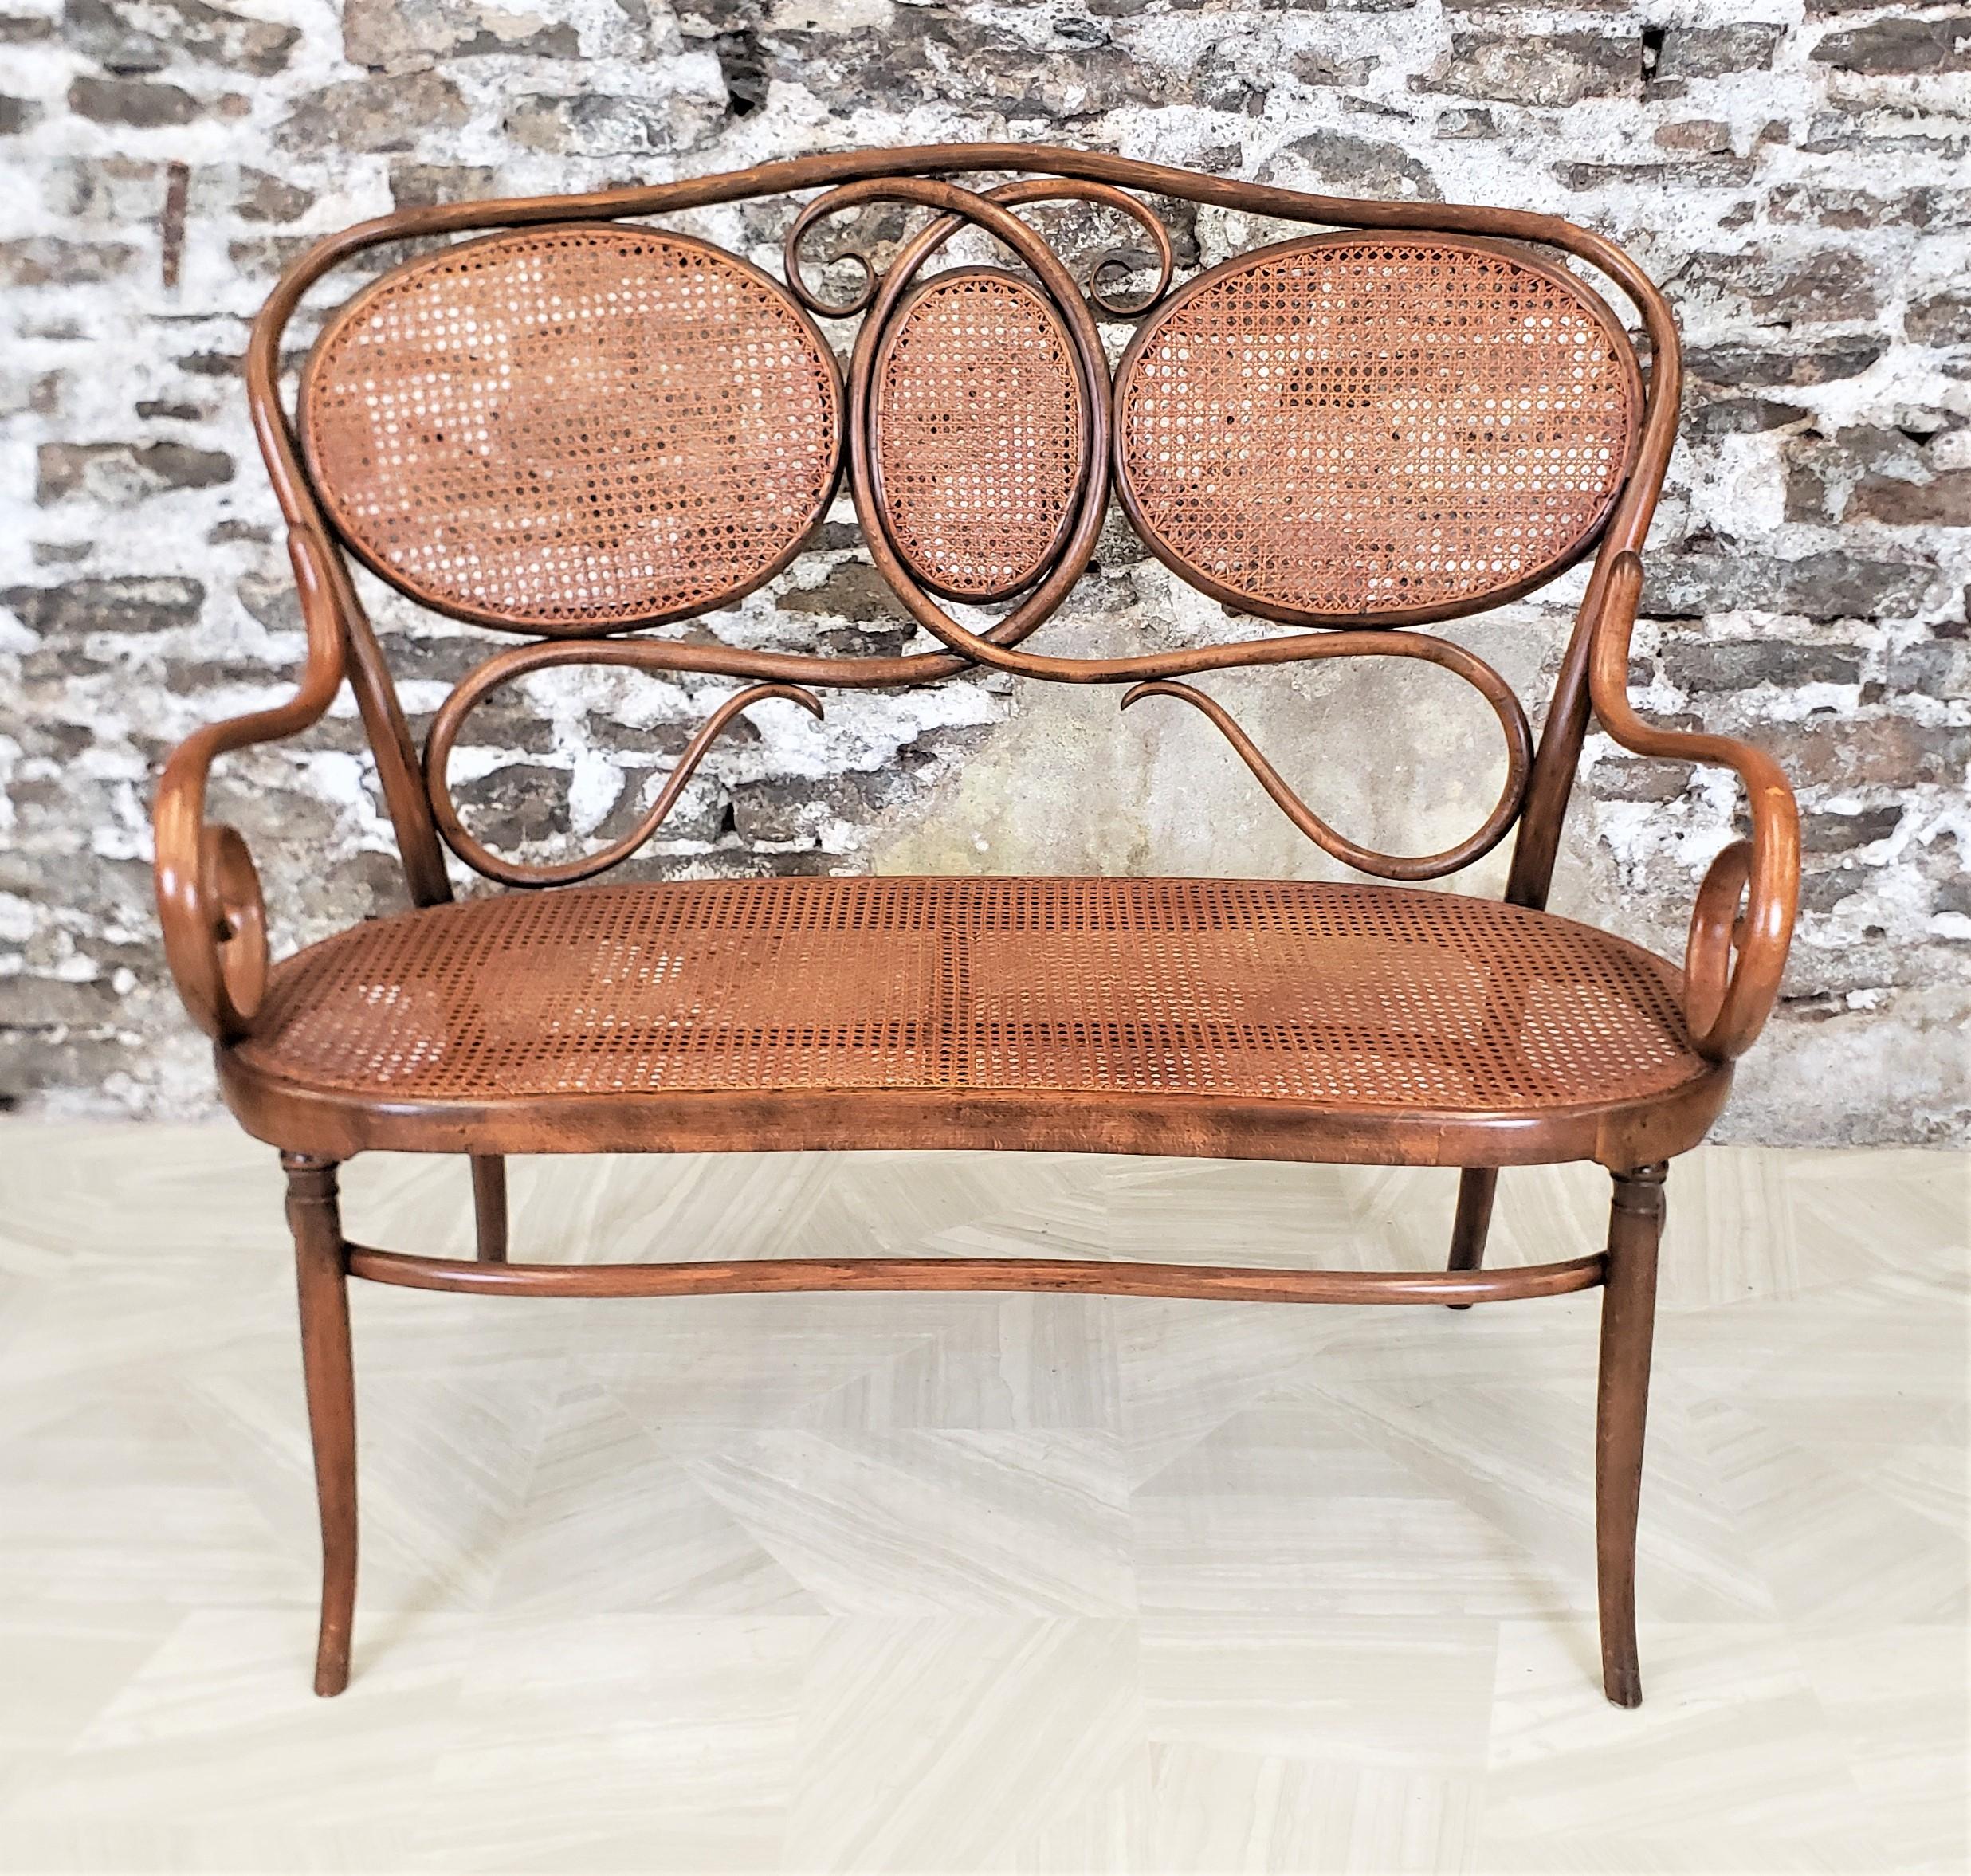 This antique bentwood settee or loveseat is unsigned, but being attributed to Gebruder Thonet based on the materials and design, and as such originates from Vienna, Austria and dates to approximately 1890 and done in the period Art Nova style. The